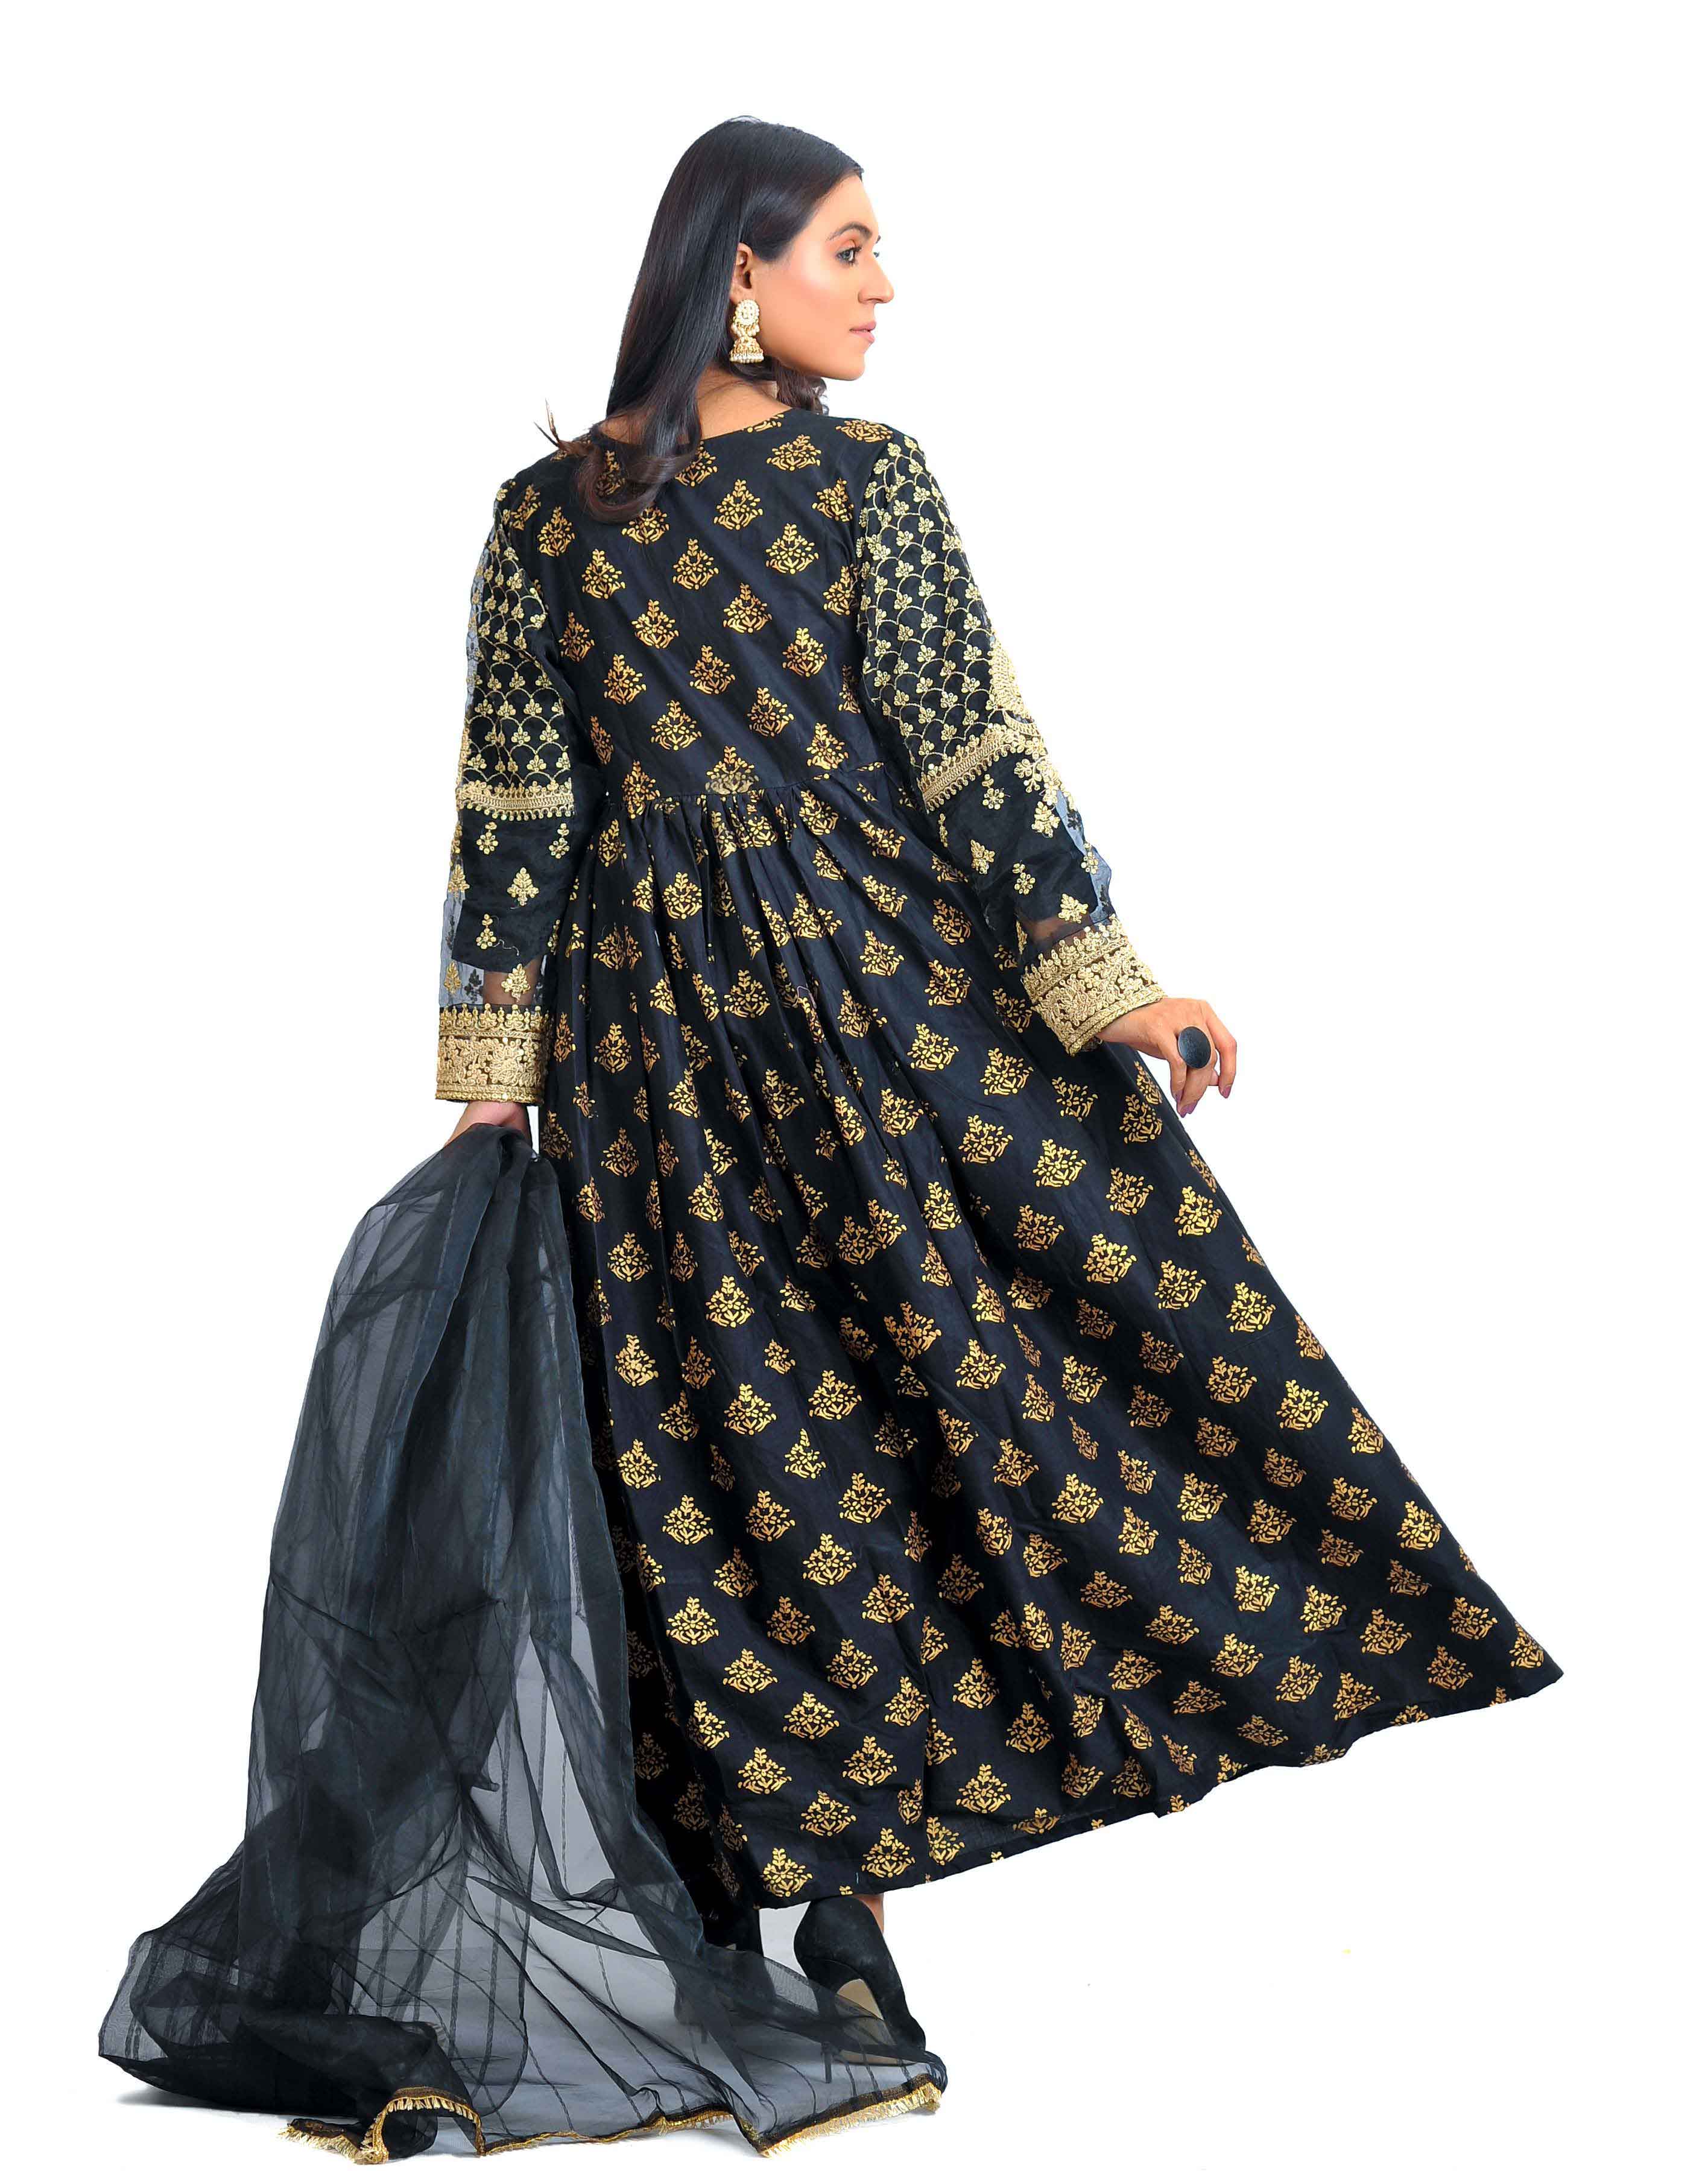 Maria B Embroidered Black Lawn 3 Piece Frock Outfit With Net Dupatta DesiPosh